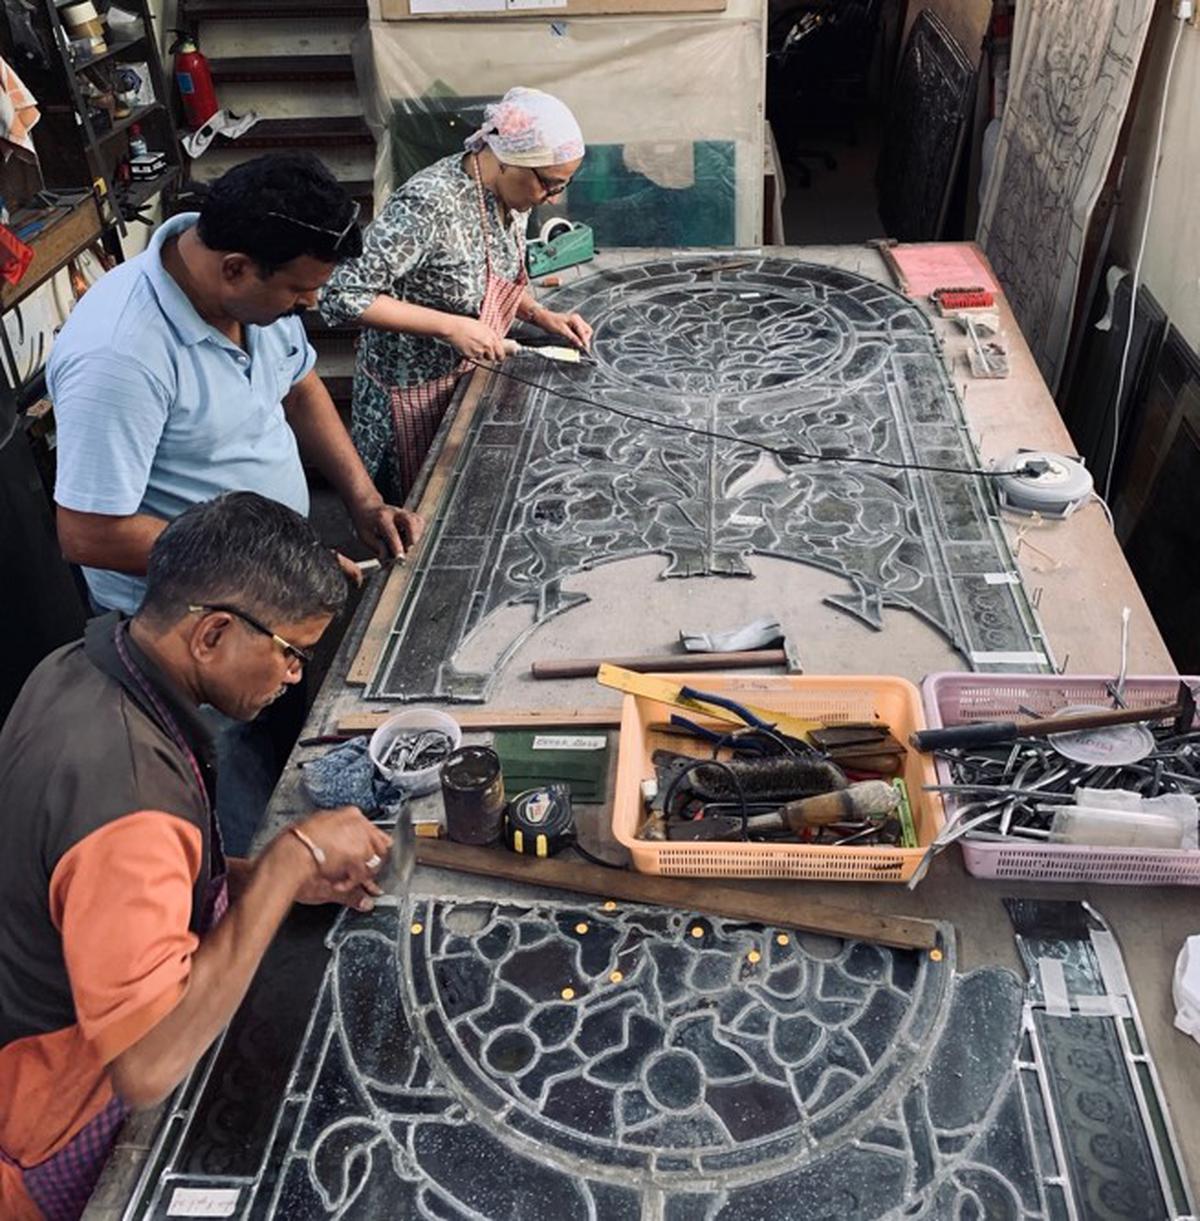 Craftsmen working on the synagogue’s stained glass windows